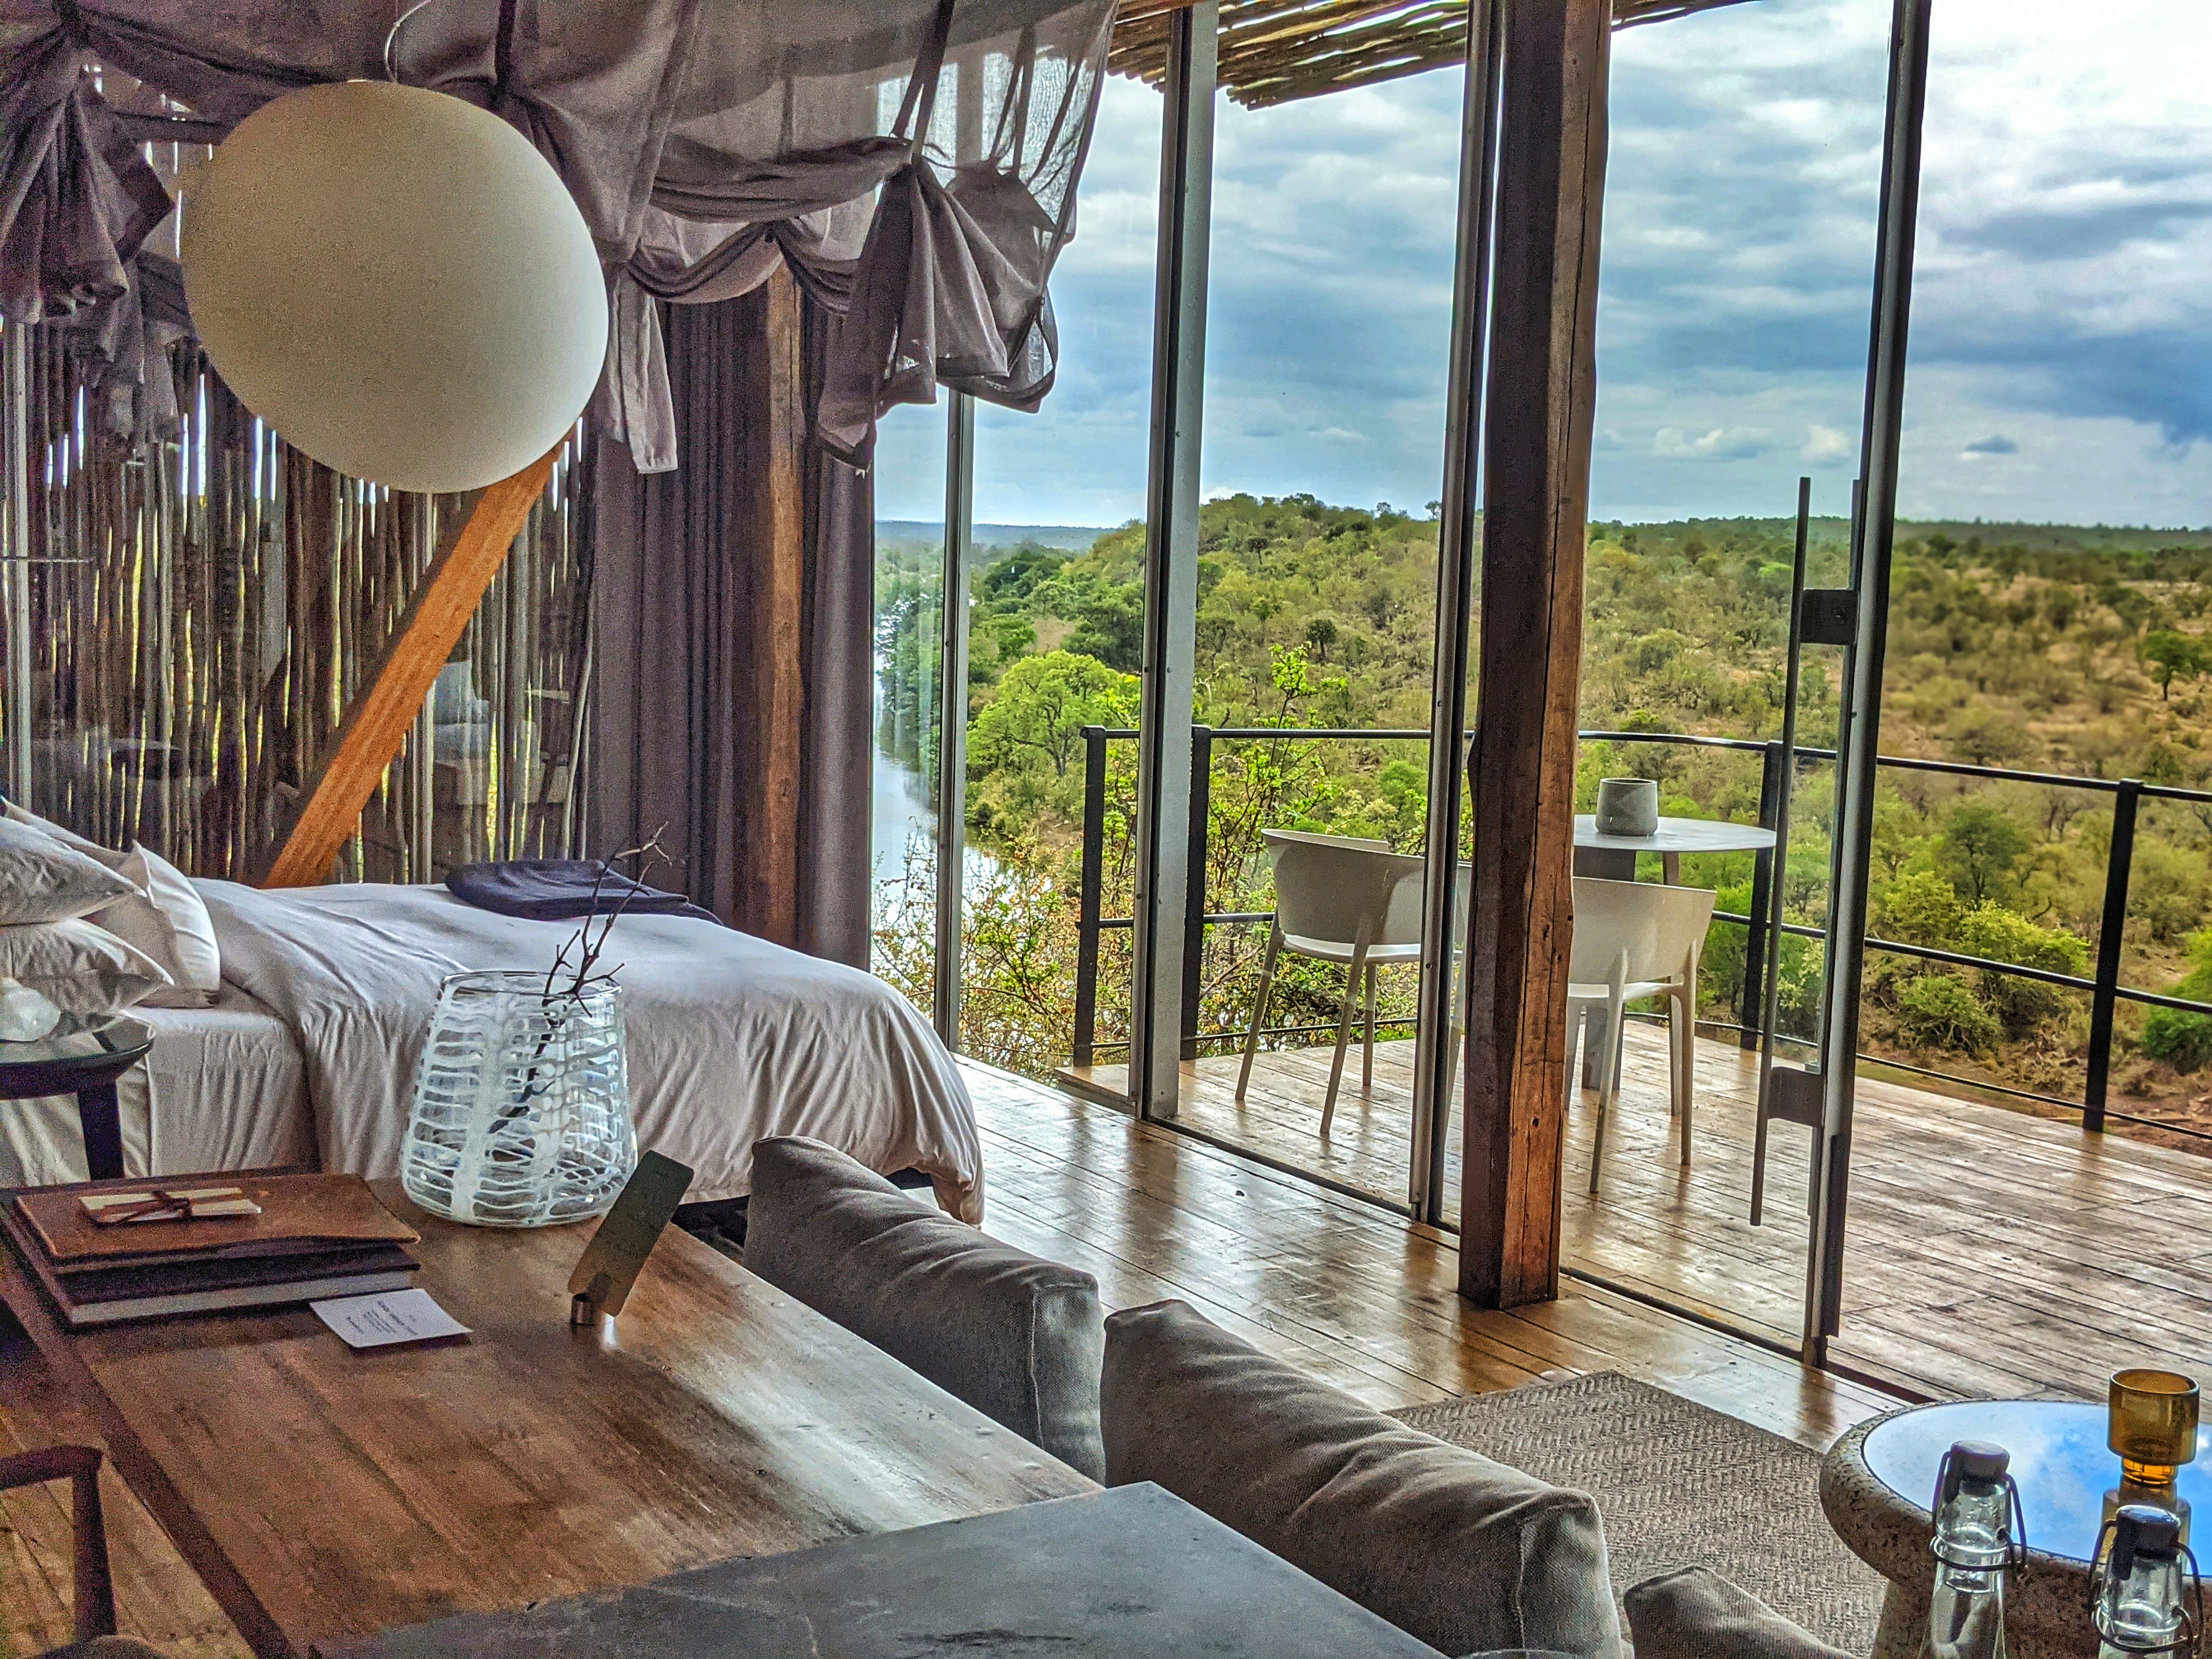 Singita Lebombo is one of the most coveted safari stays in South Africa. 